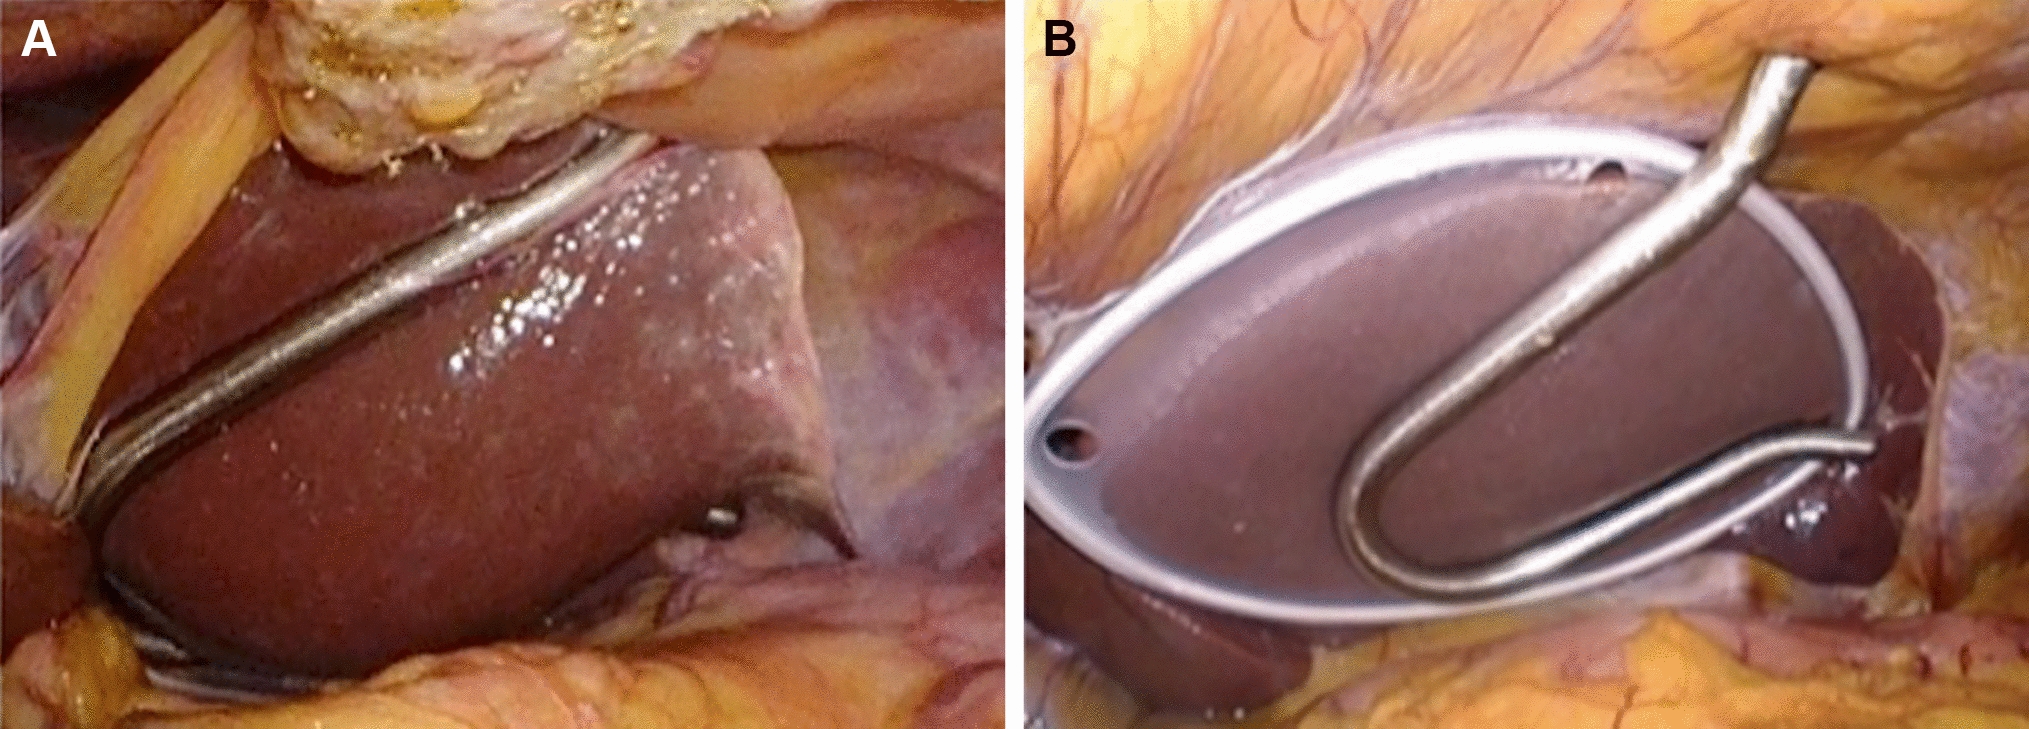 A silicone disc for liver retraction in laparoscopic gastrectomy reduces the postoperative increase in the liver enzyme level